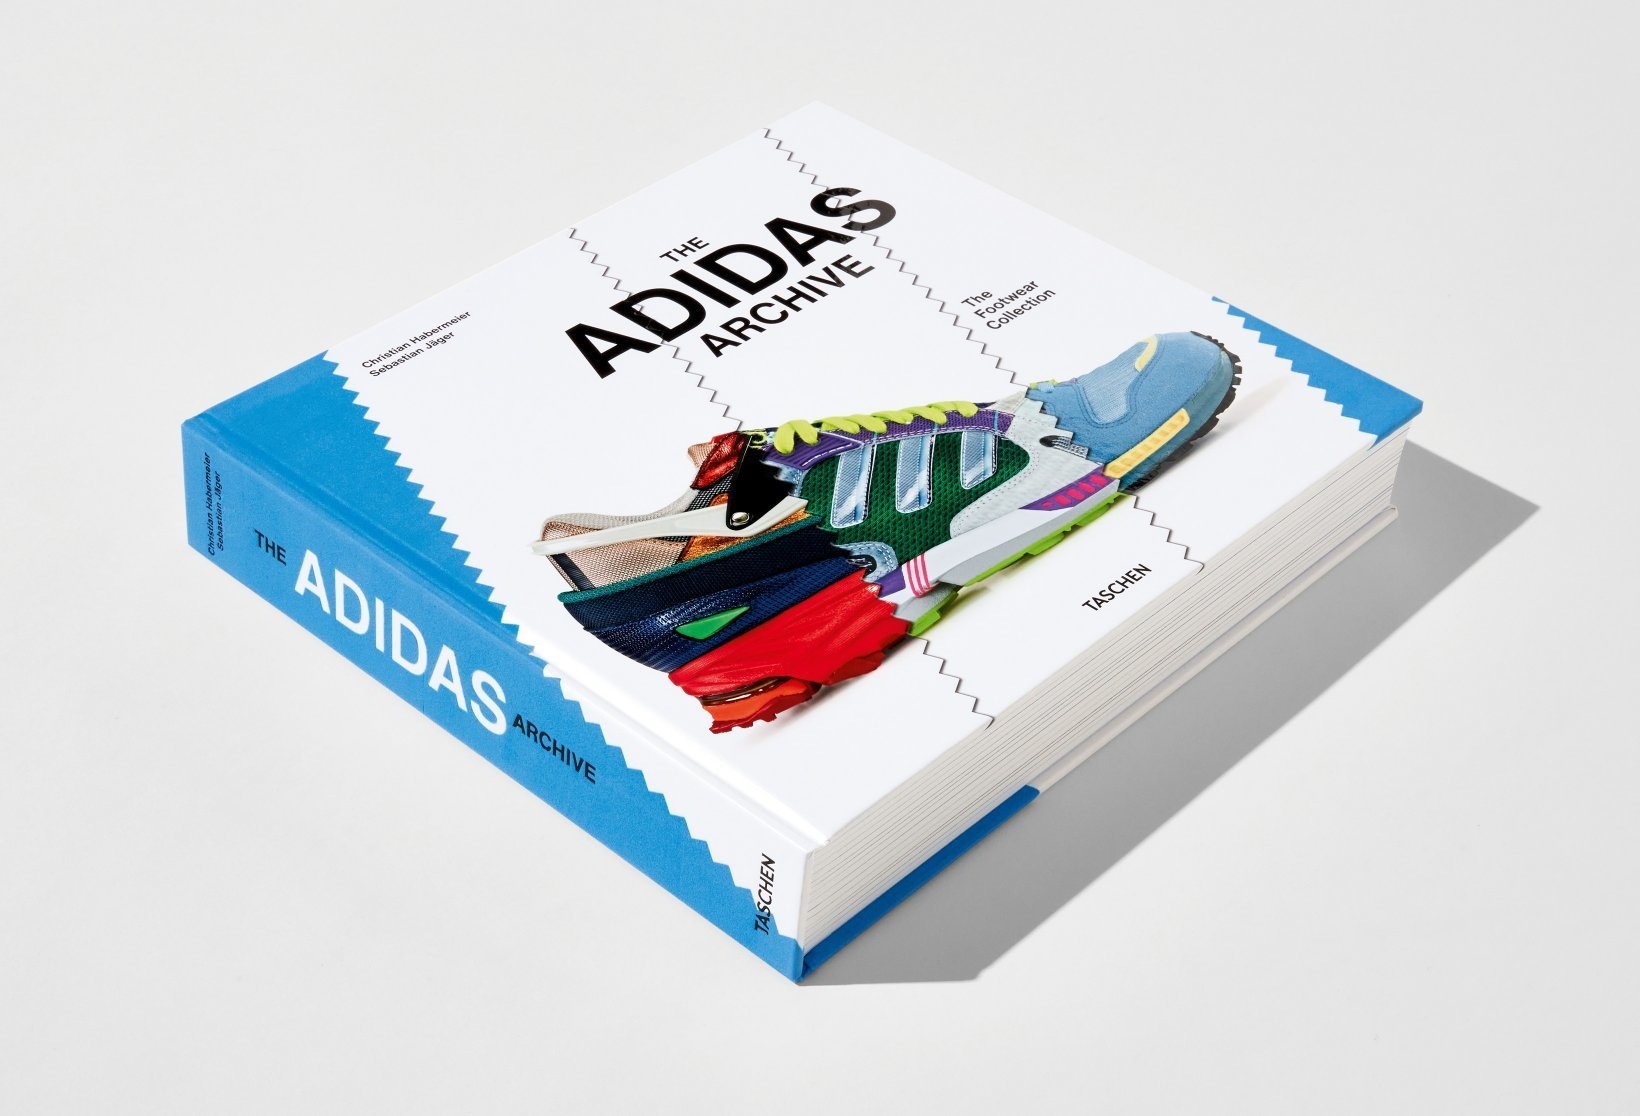 Trouva: The Adidas Footwear Collection Book